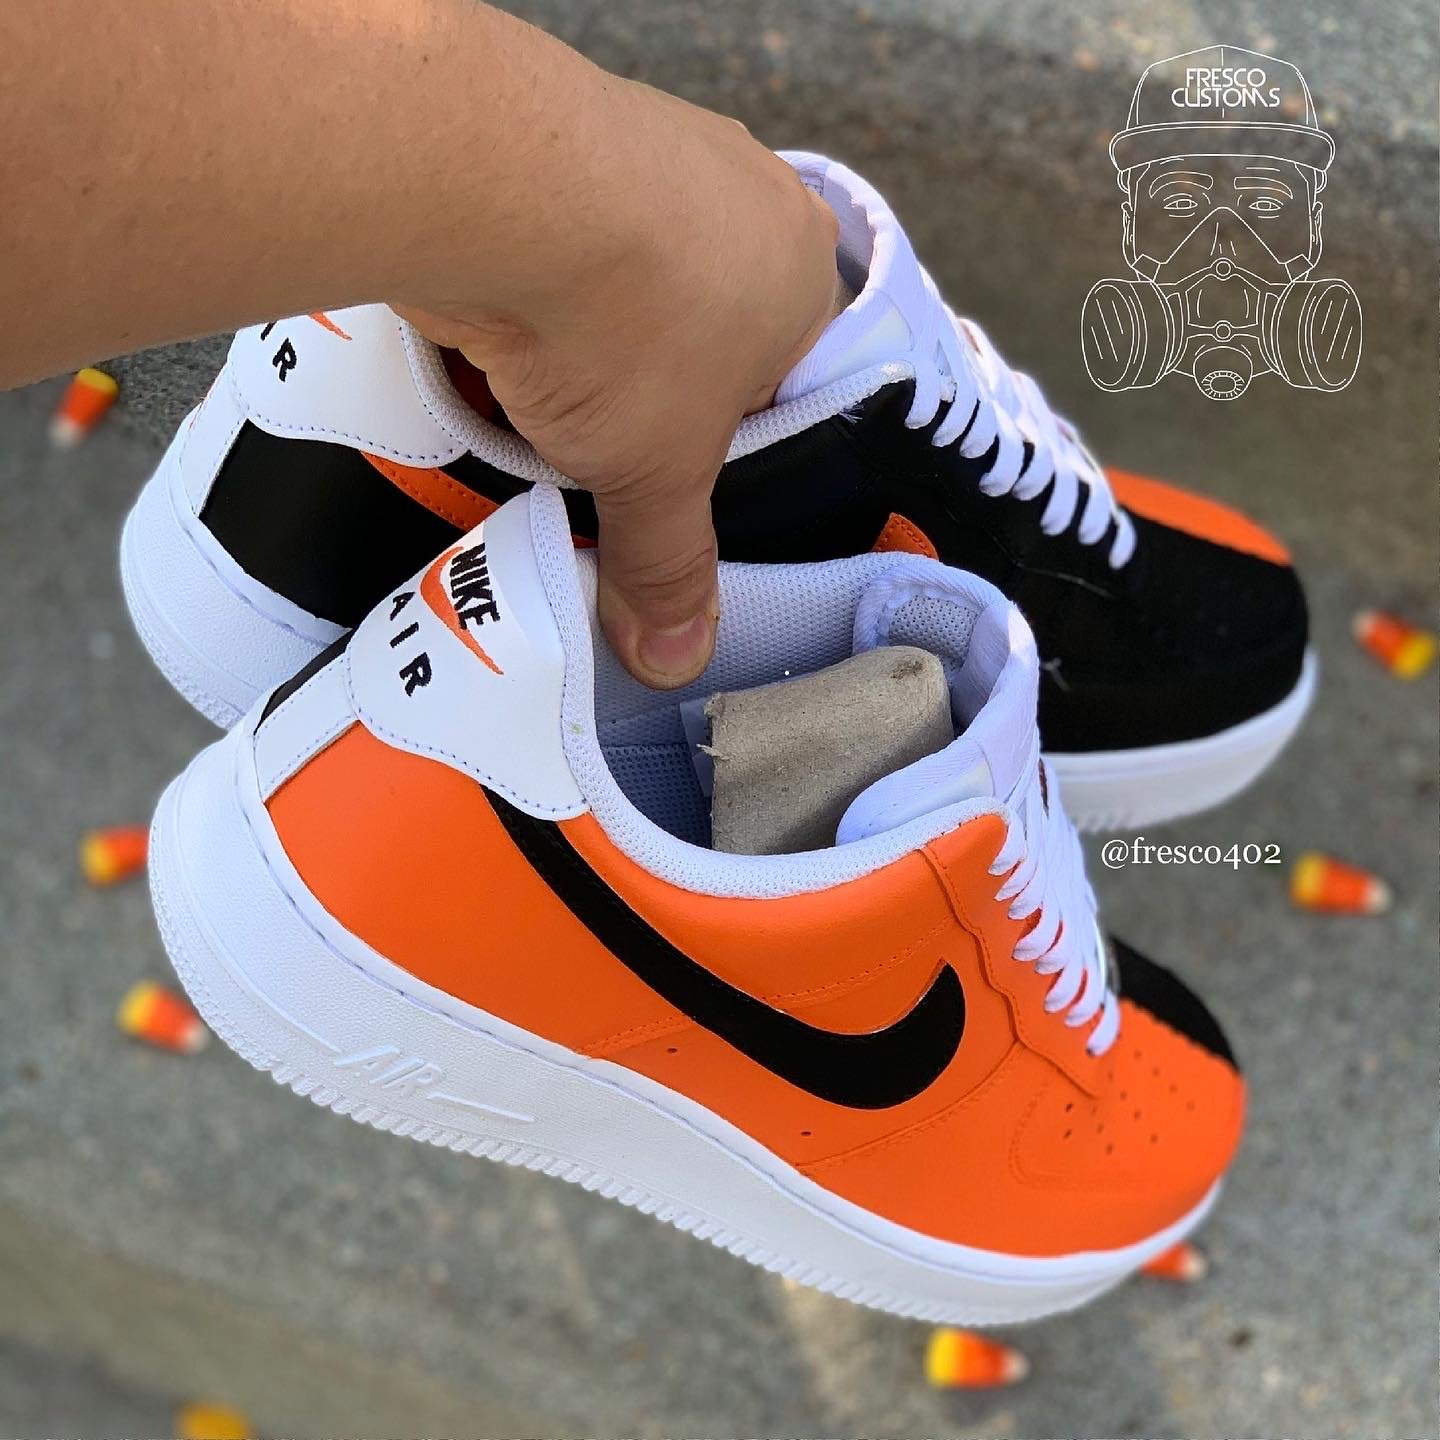  TUOAN Black,Orange,Popular graffiti-02 Air Force Customized  Shoes Men's Shoes Women's Shoes Fashion Sports Shoes Cool Animation  Sneakers